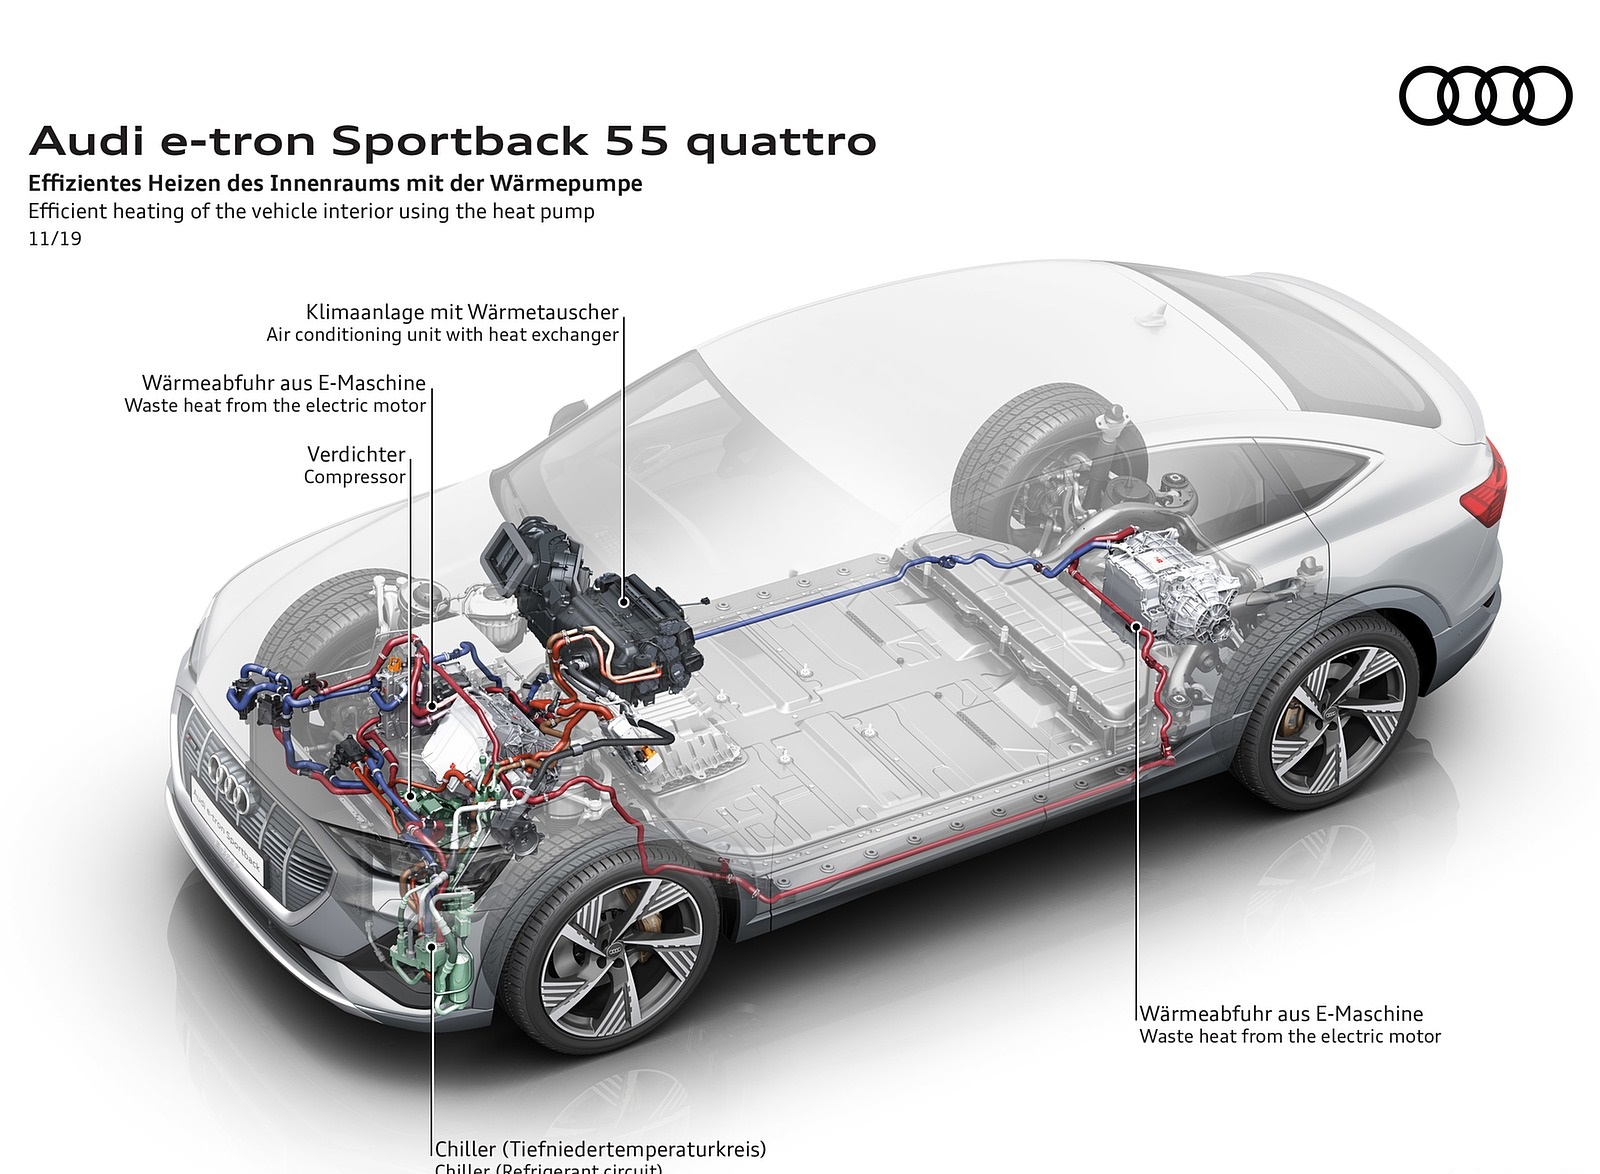 2020 Audi e-tron Sportback Efficient heating of the vehicle interior using the heat pump Wallpapers #97 of 145